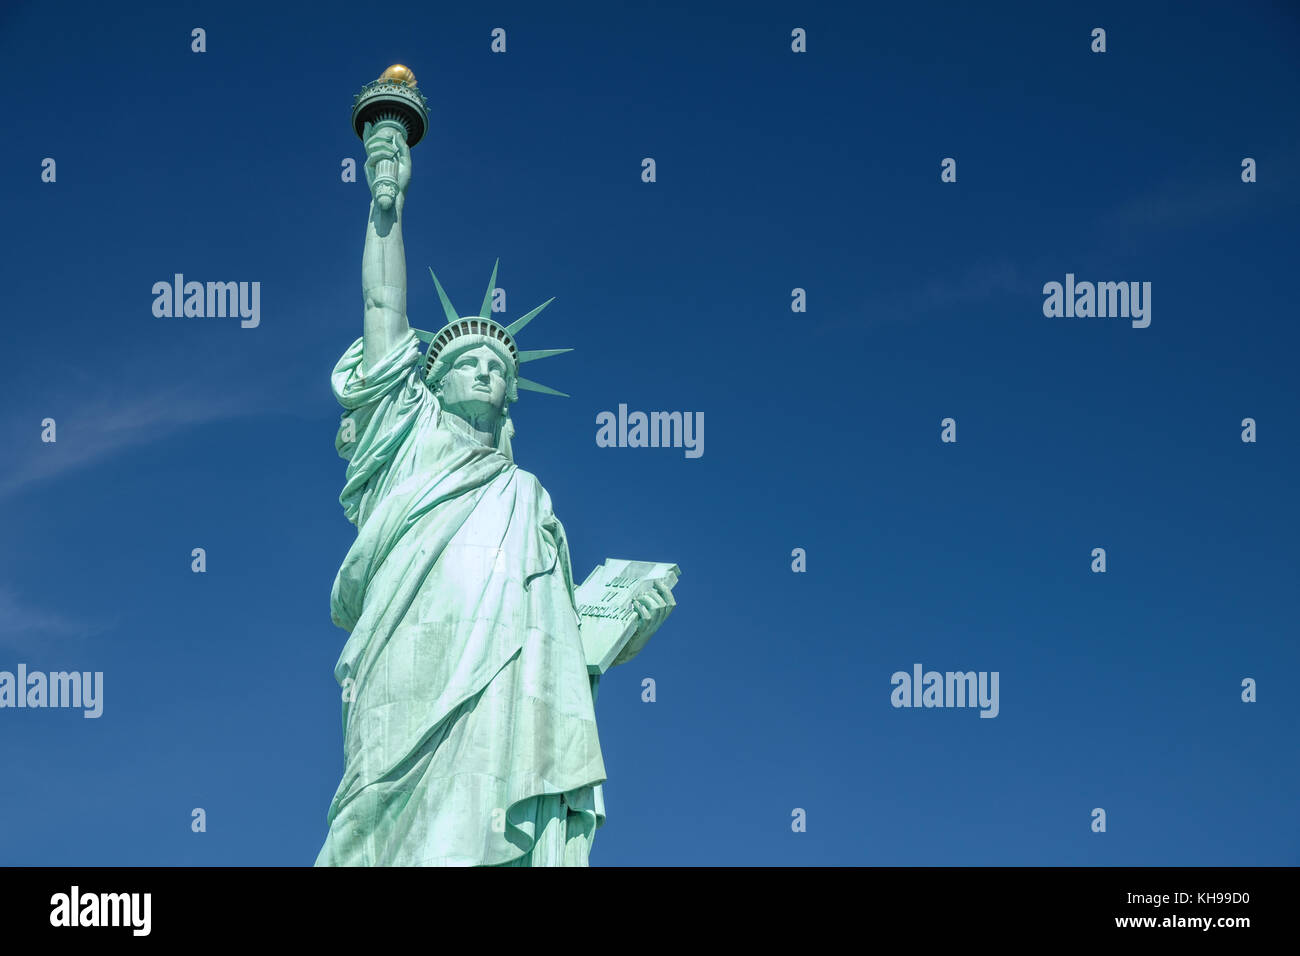 Statue of Liberty close up against a blue sky, also known as Lady Liberty Stock Photo